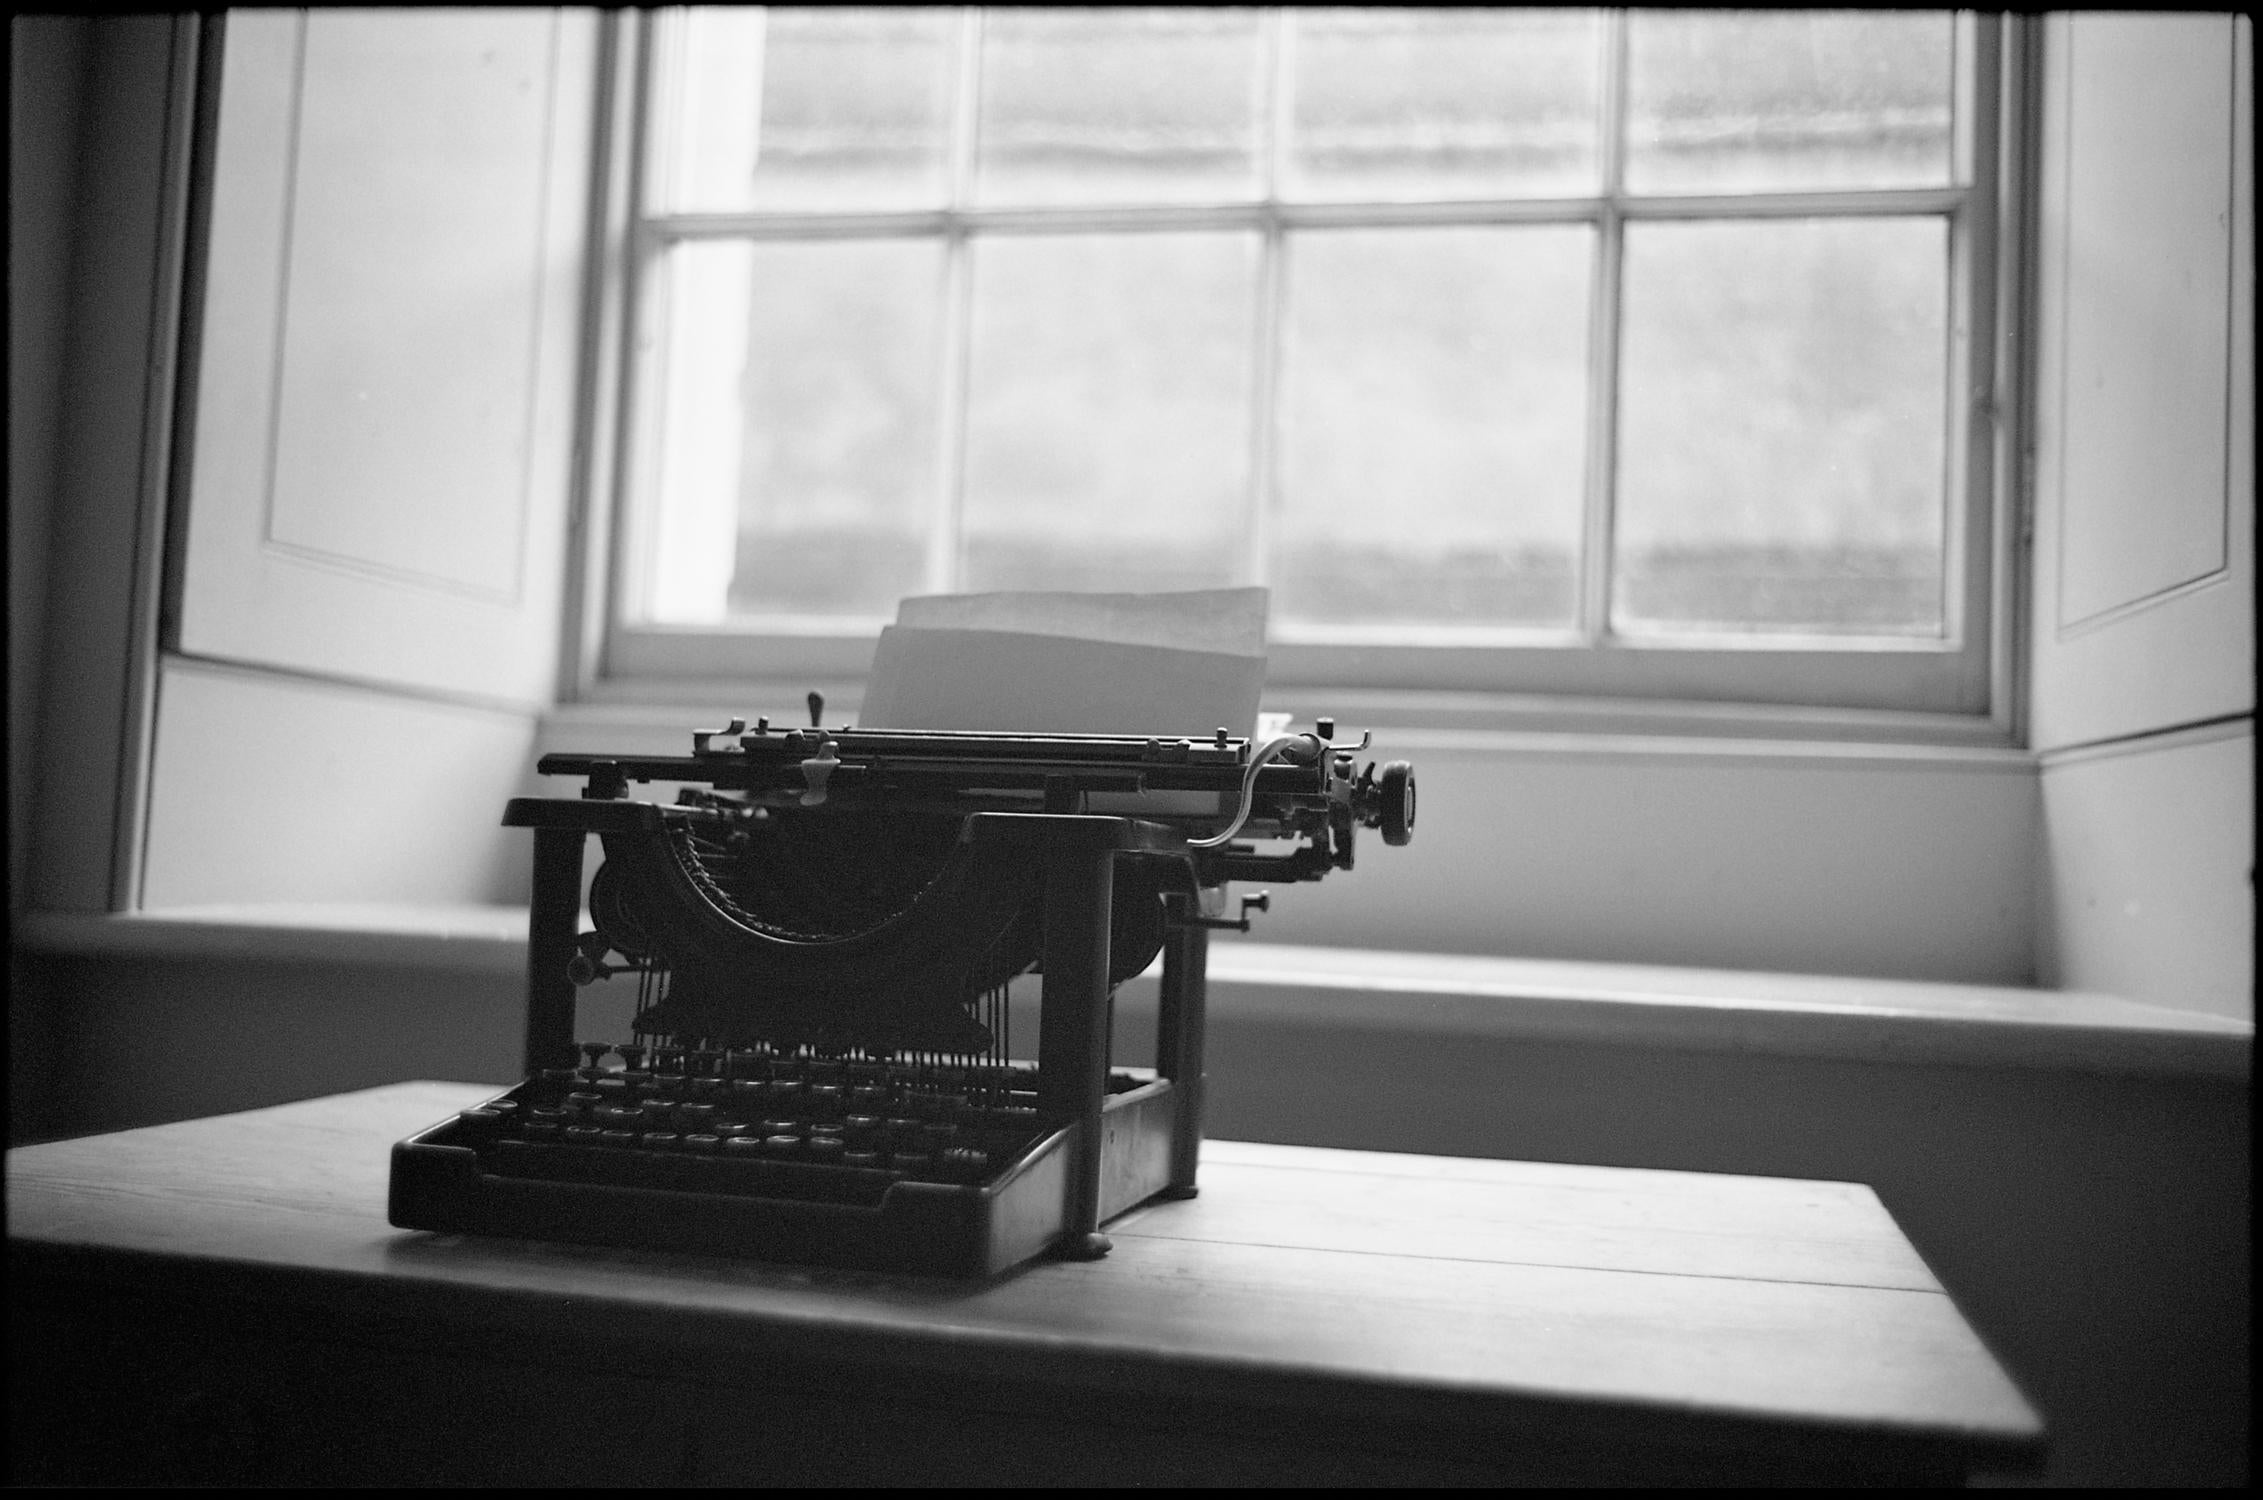 Paul Cooklin Black and White Photograph - Edition 4/10 - Typewriter, Ickworth Hall, Silver Gelatin Photograph